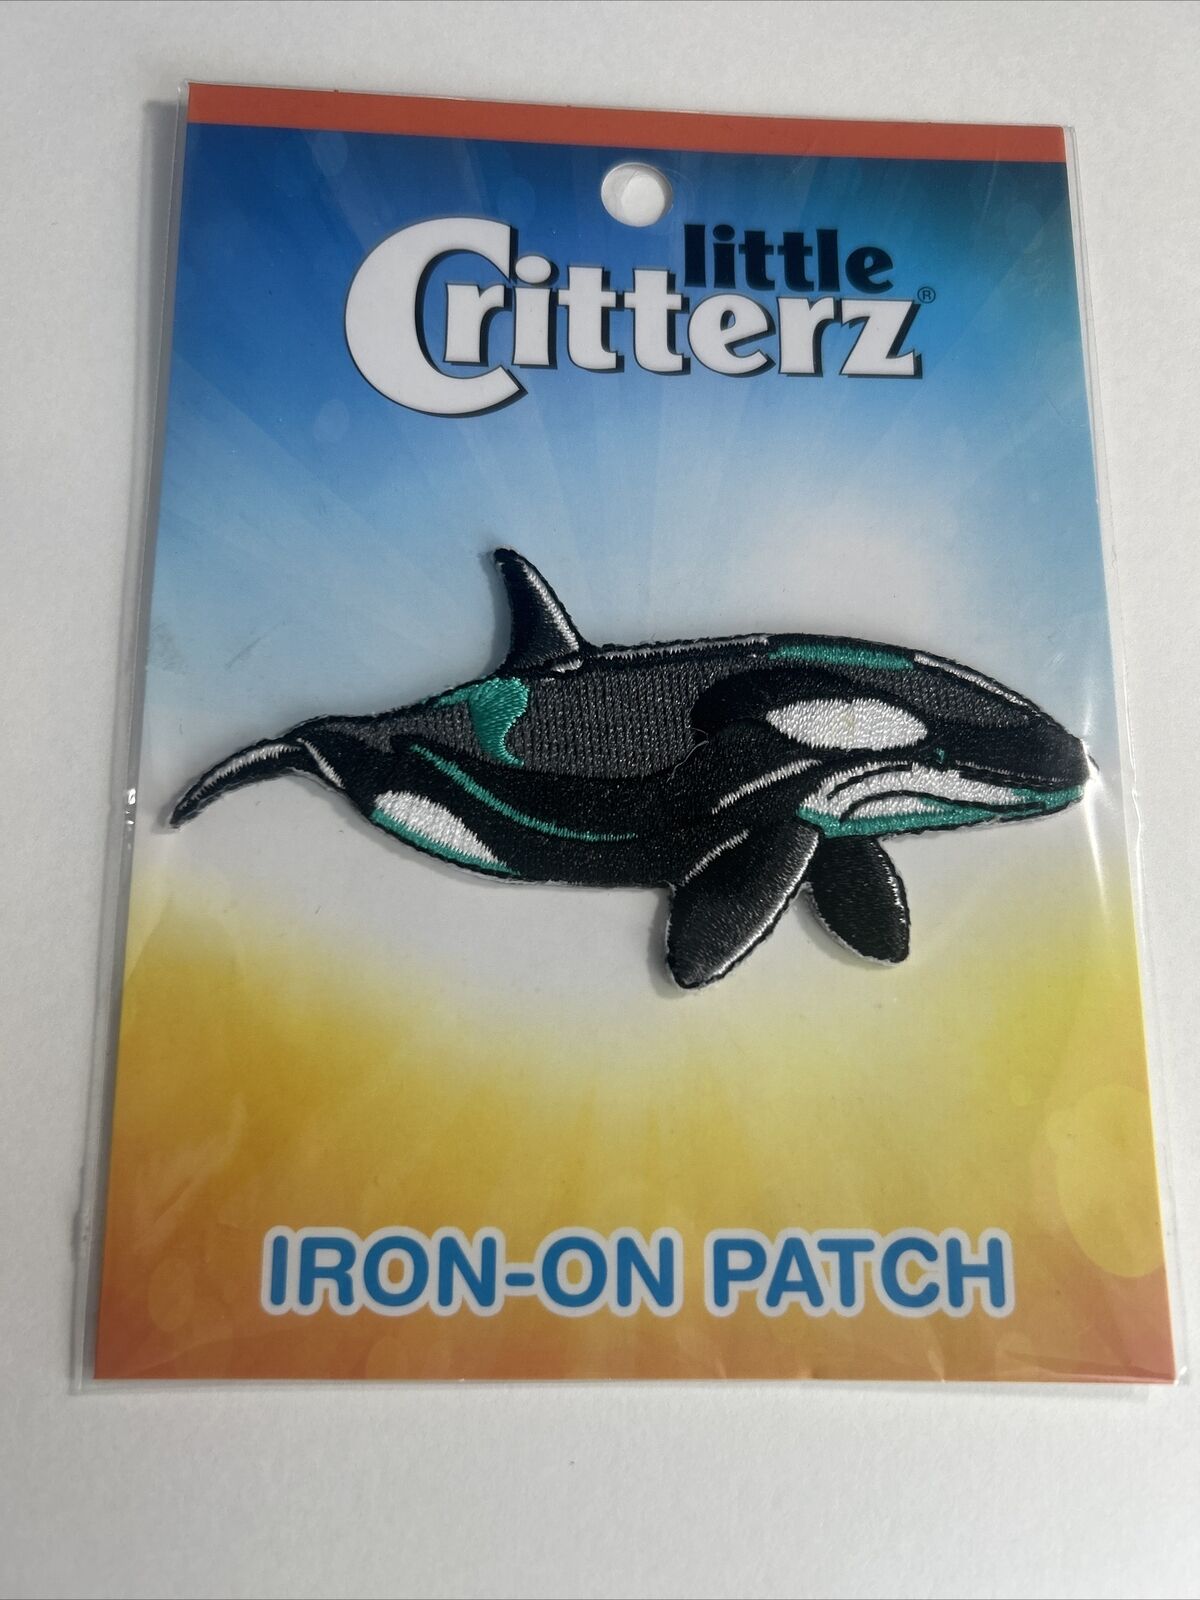 Orca Whale 3" Little Critterz Iron-on Patch  Craft Sewing Embelishment DIY NEW! Без бренда